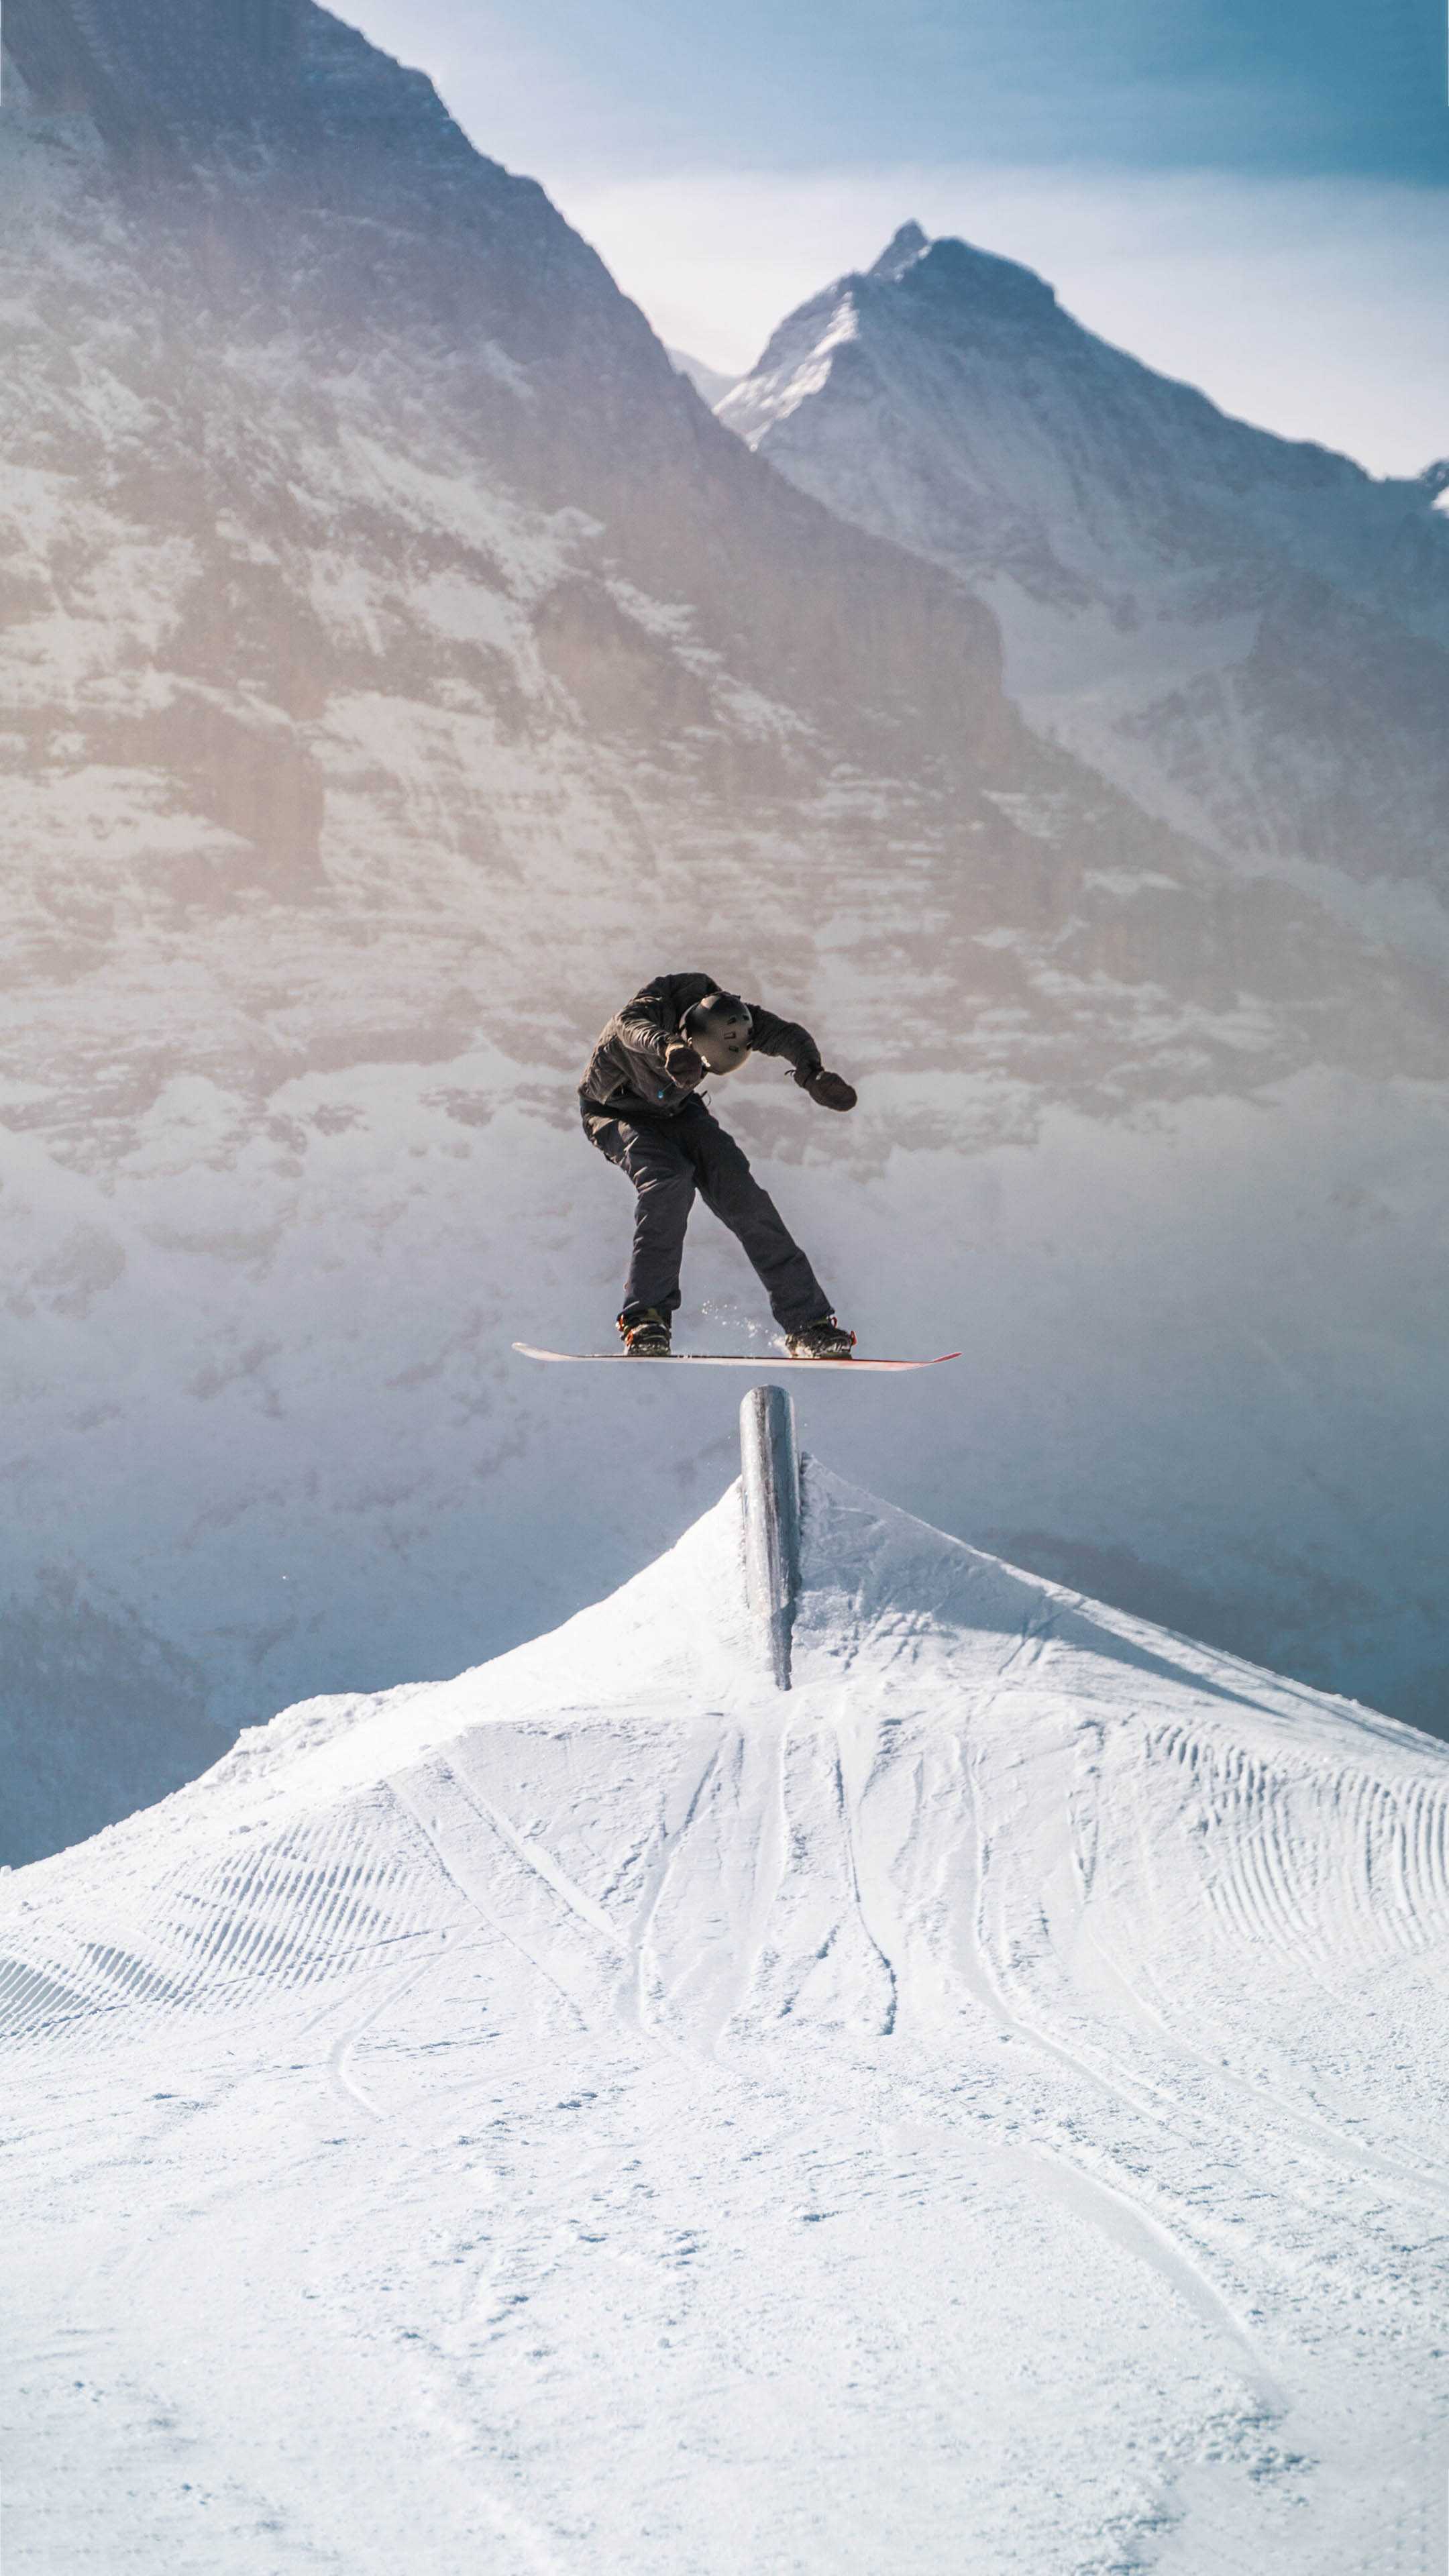 A snowboarder in mid-air after a jump off a snowy mountain - Ski